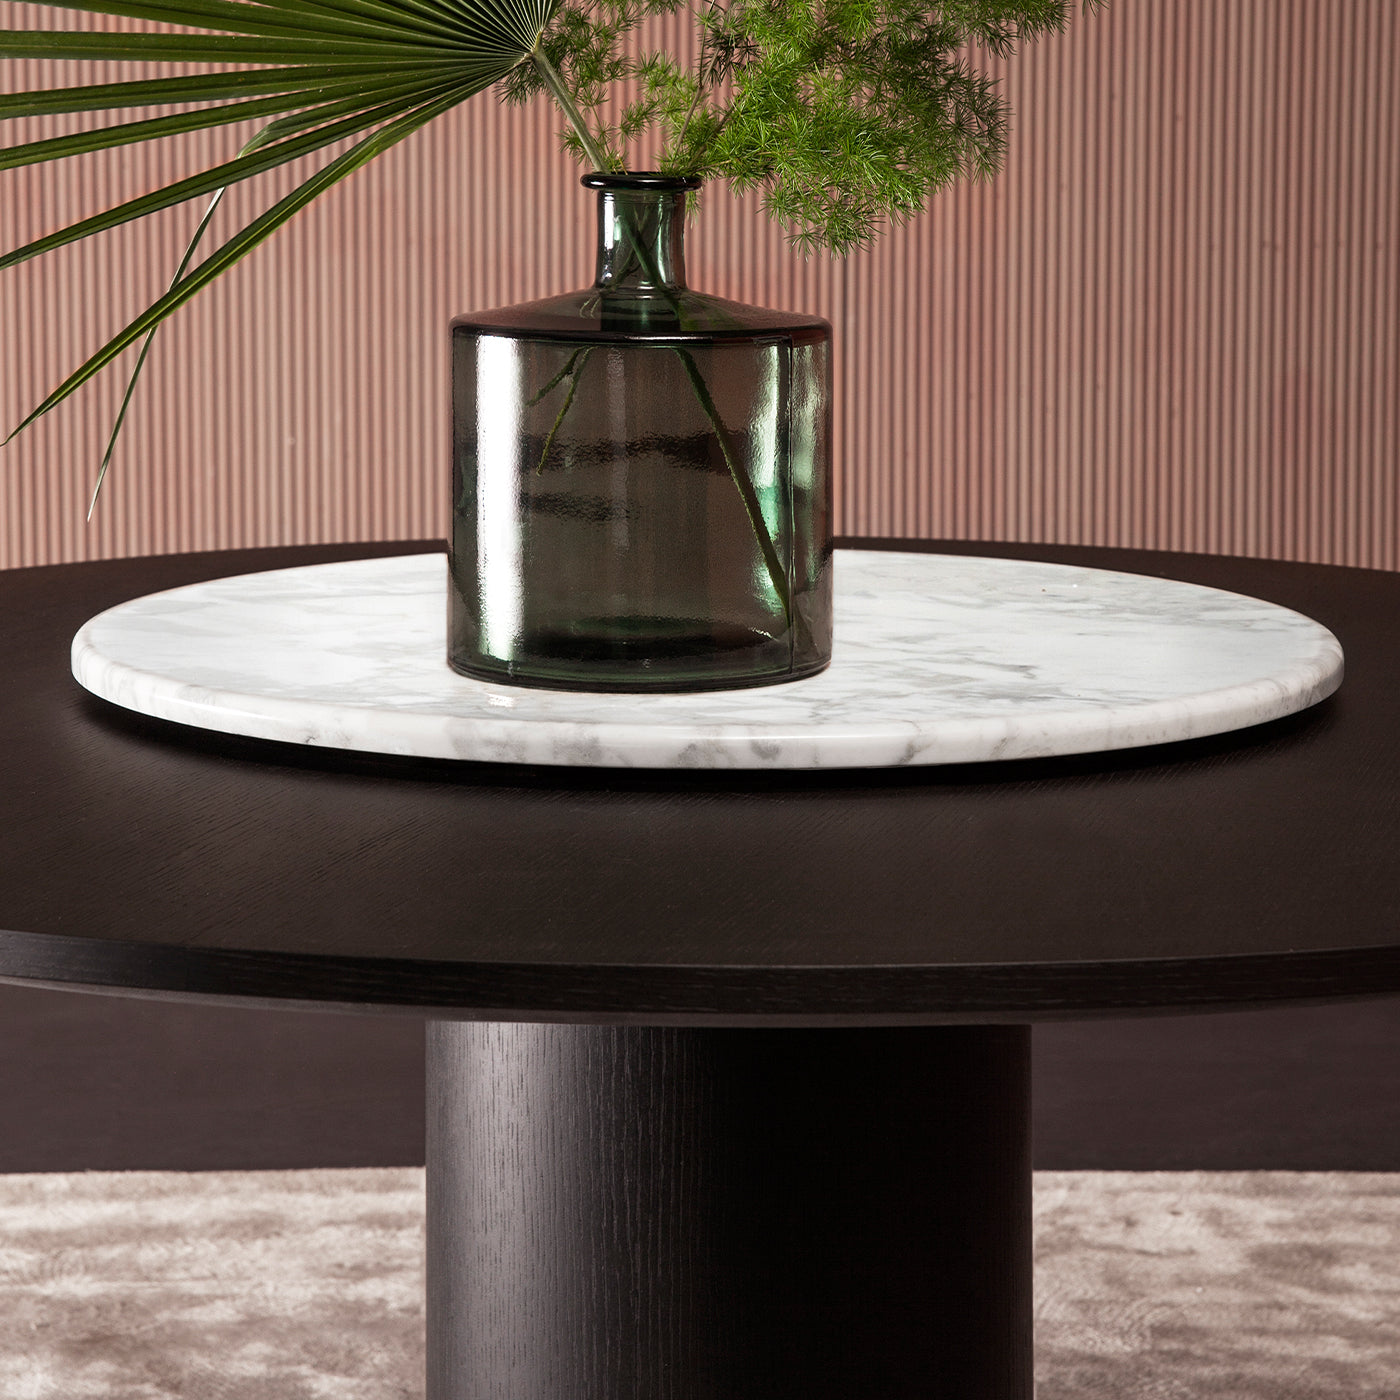 Circle Dining Table with Lazy Susan by Gianluigi Landoni - Alternative view 2